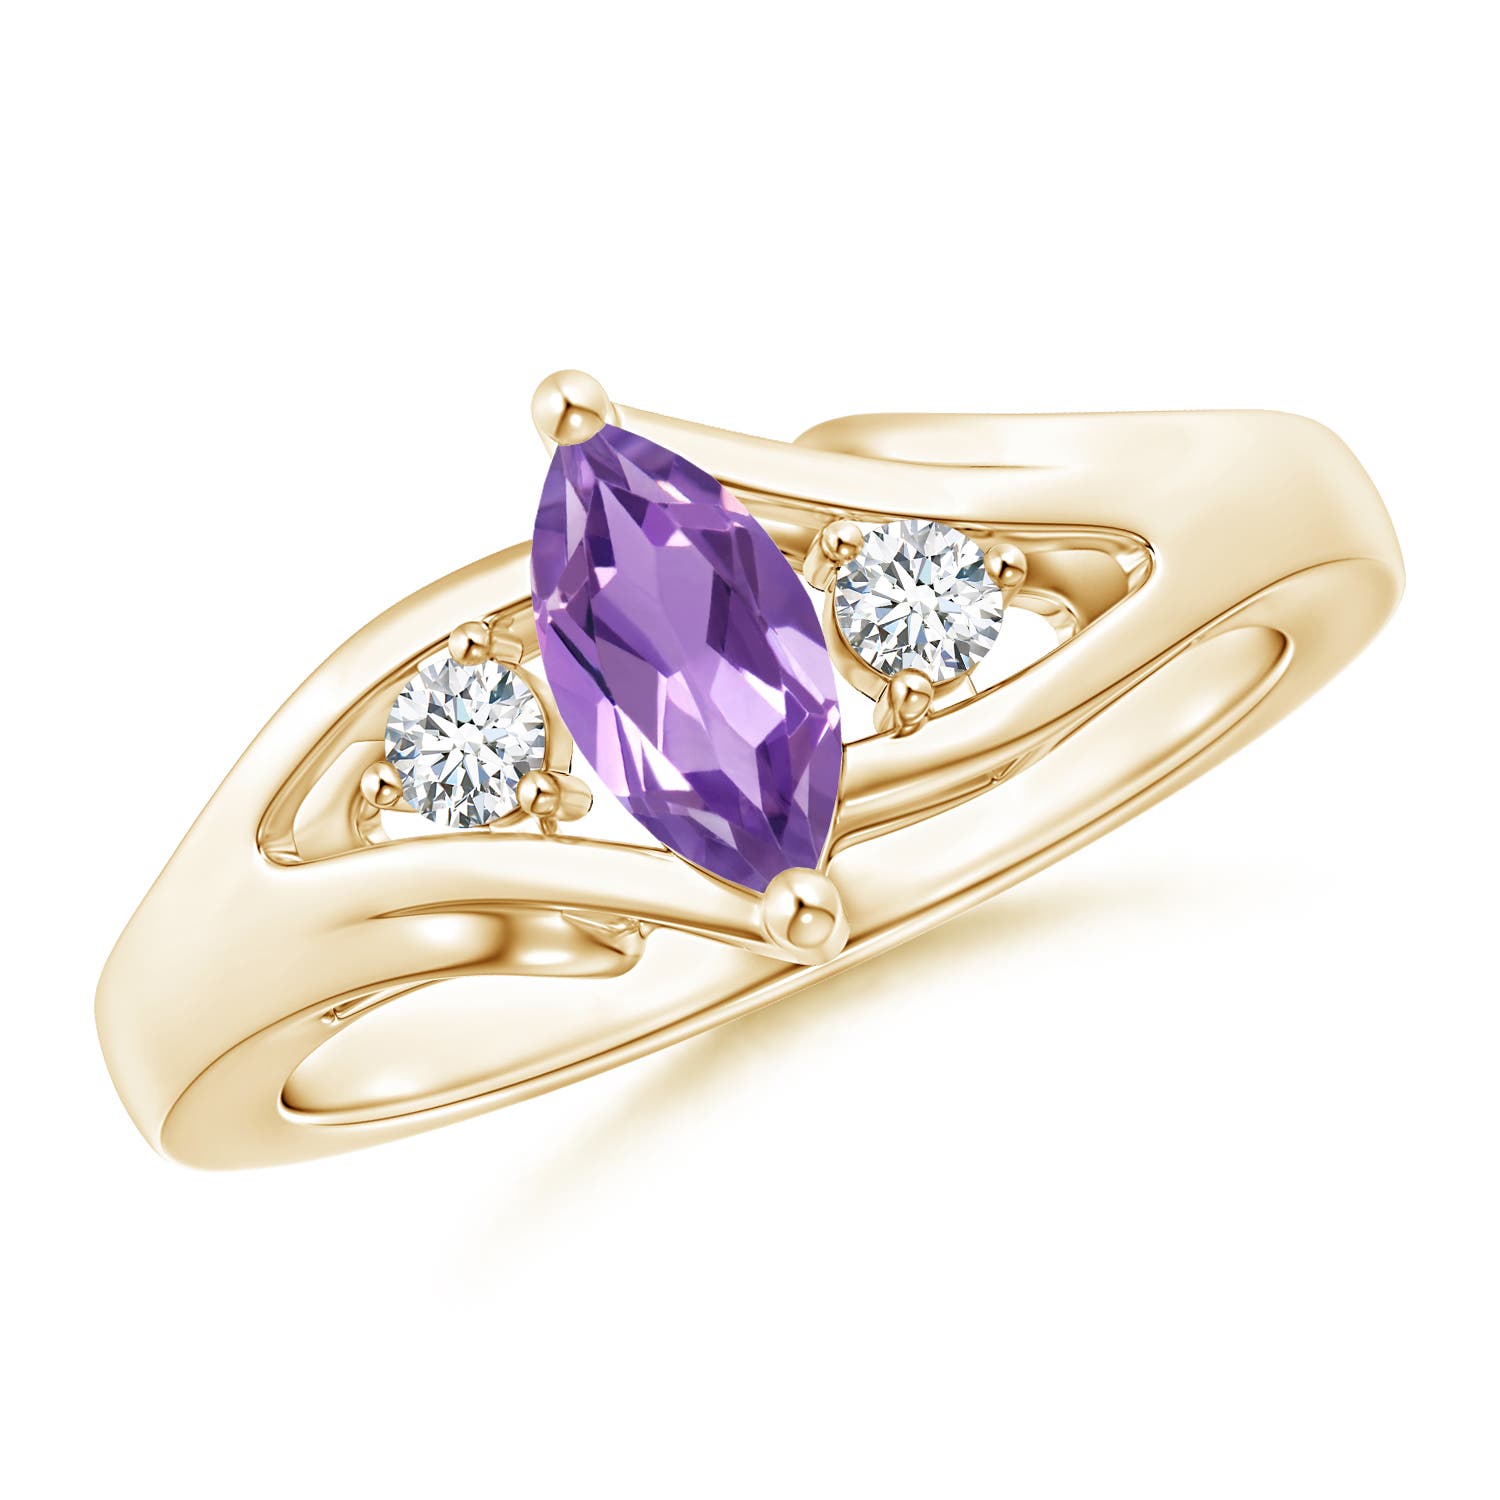 A - Amethyst / 0.64 CT / 14 KT Yellow Gold